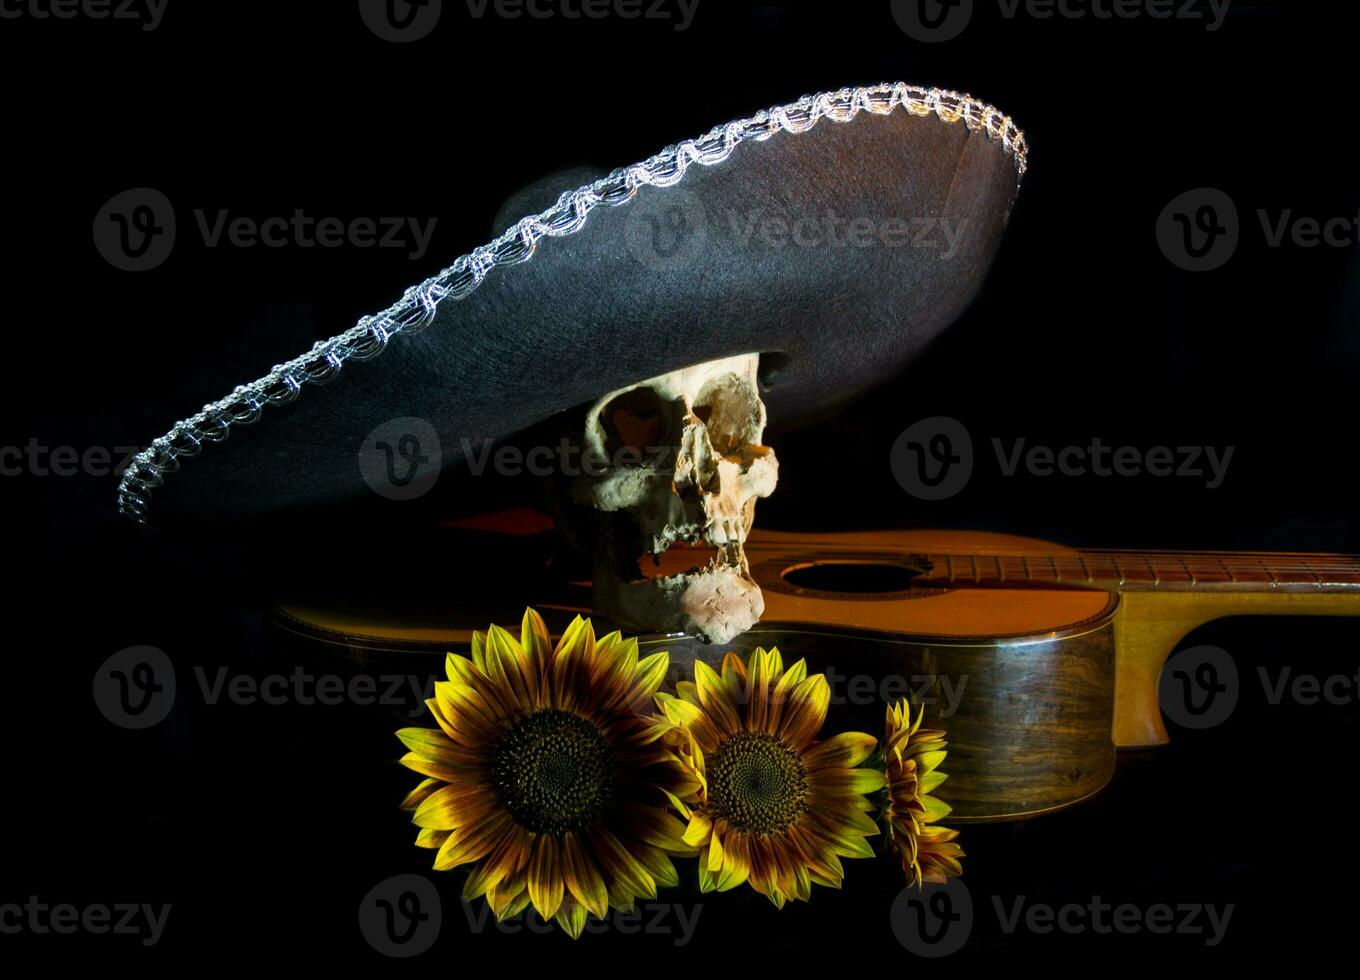 human skull, mexican hat, guitar and sunflowers photo